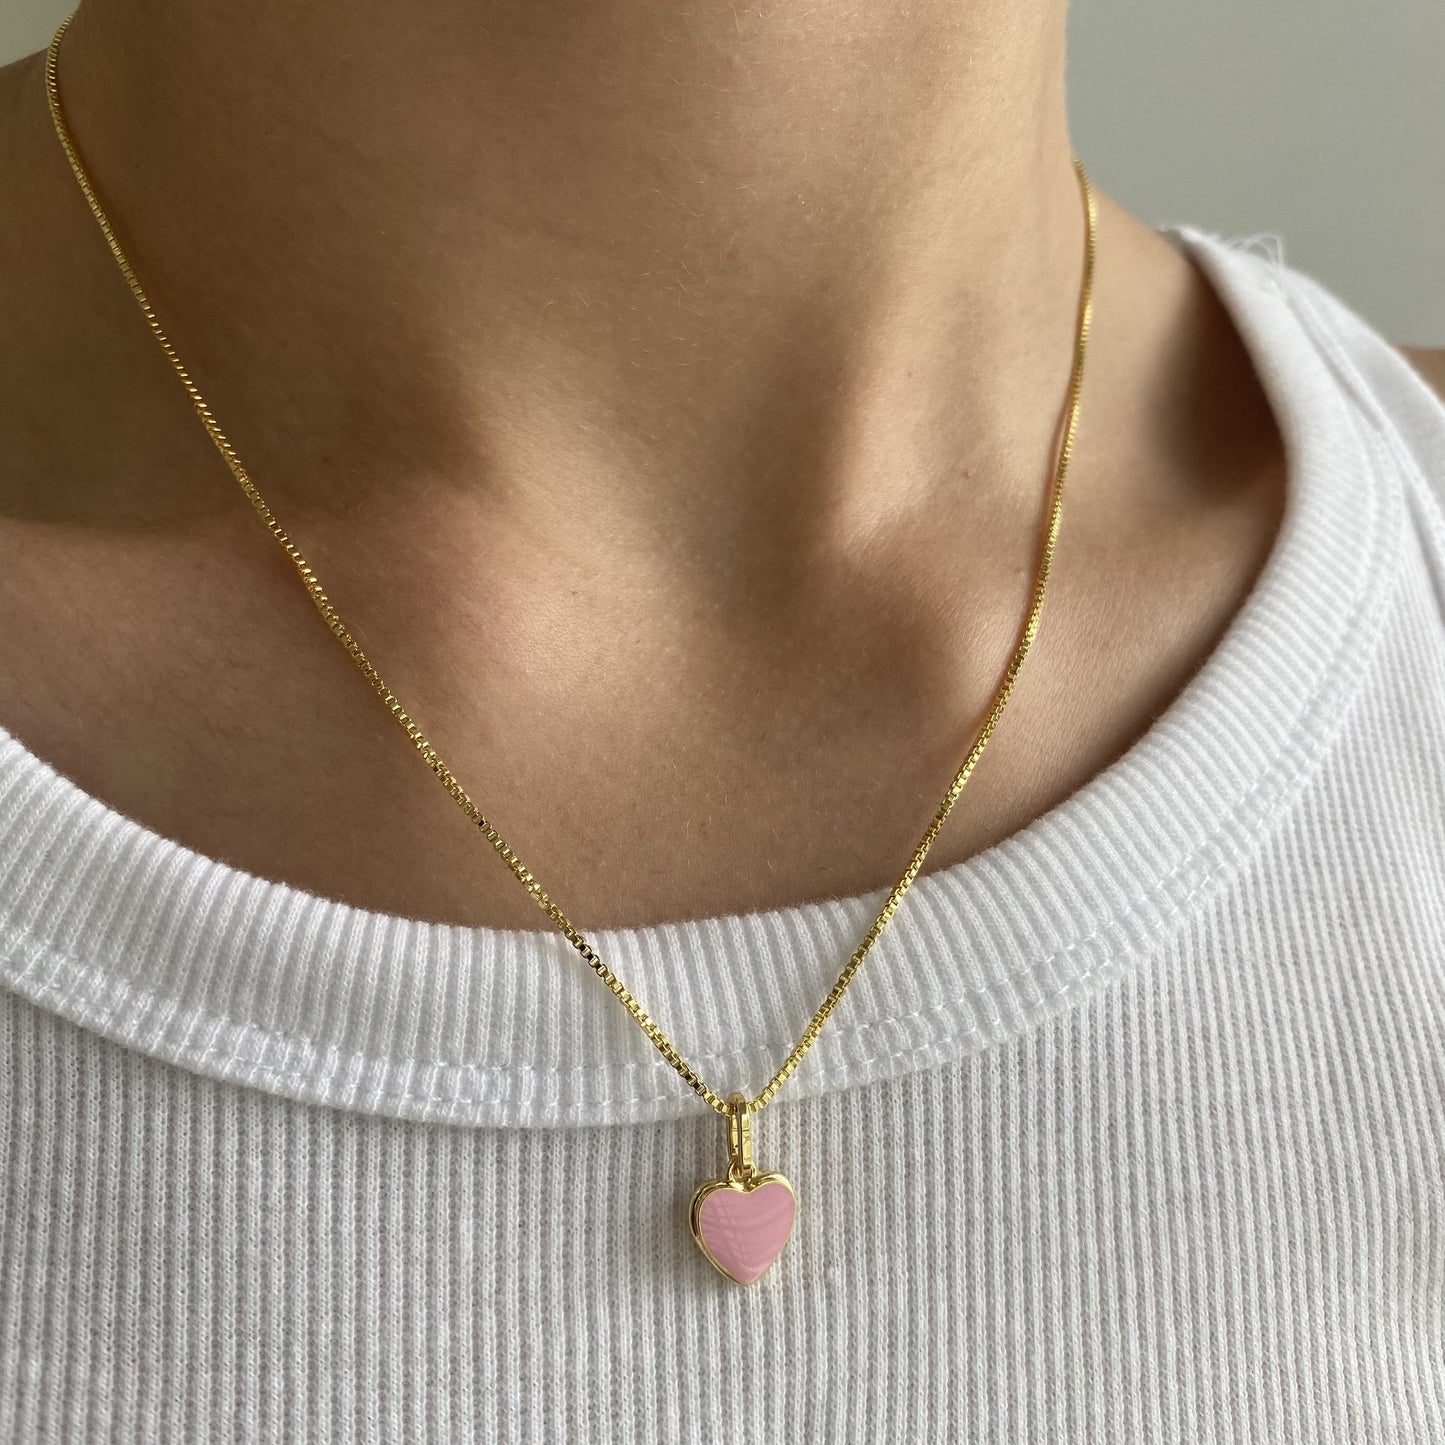 Lychee Love Necklace